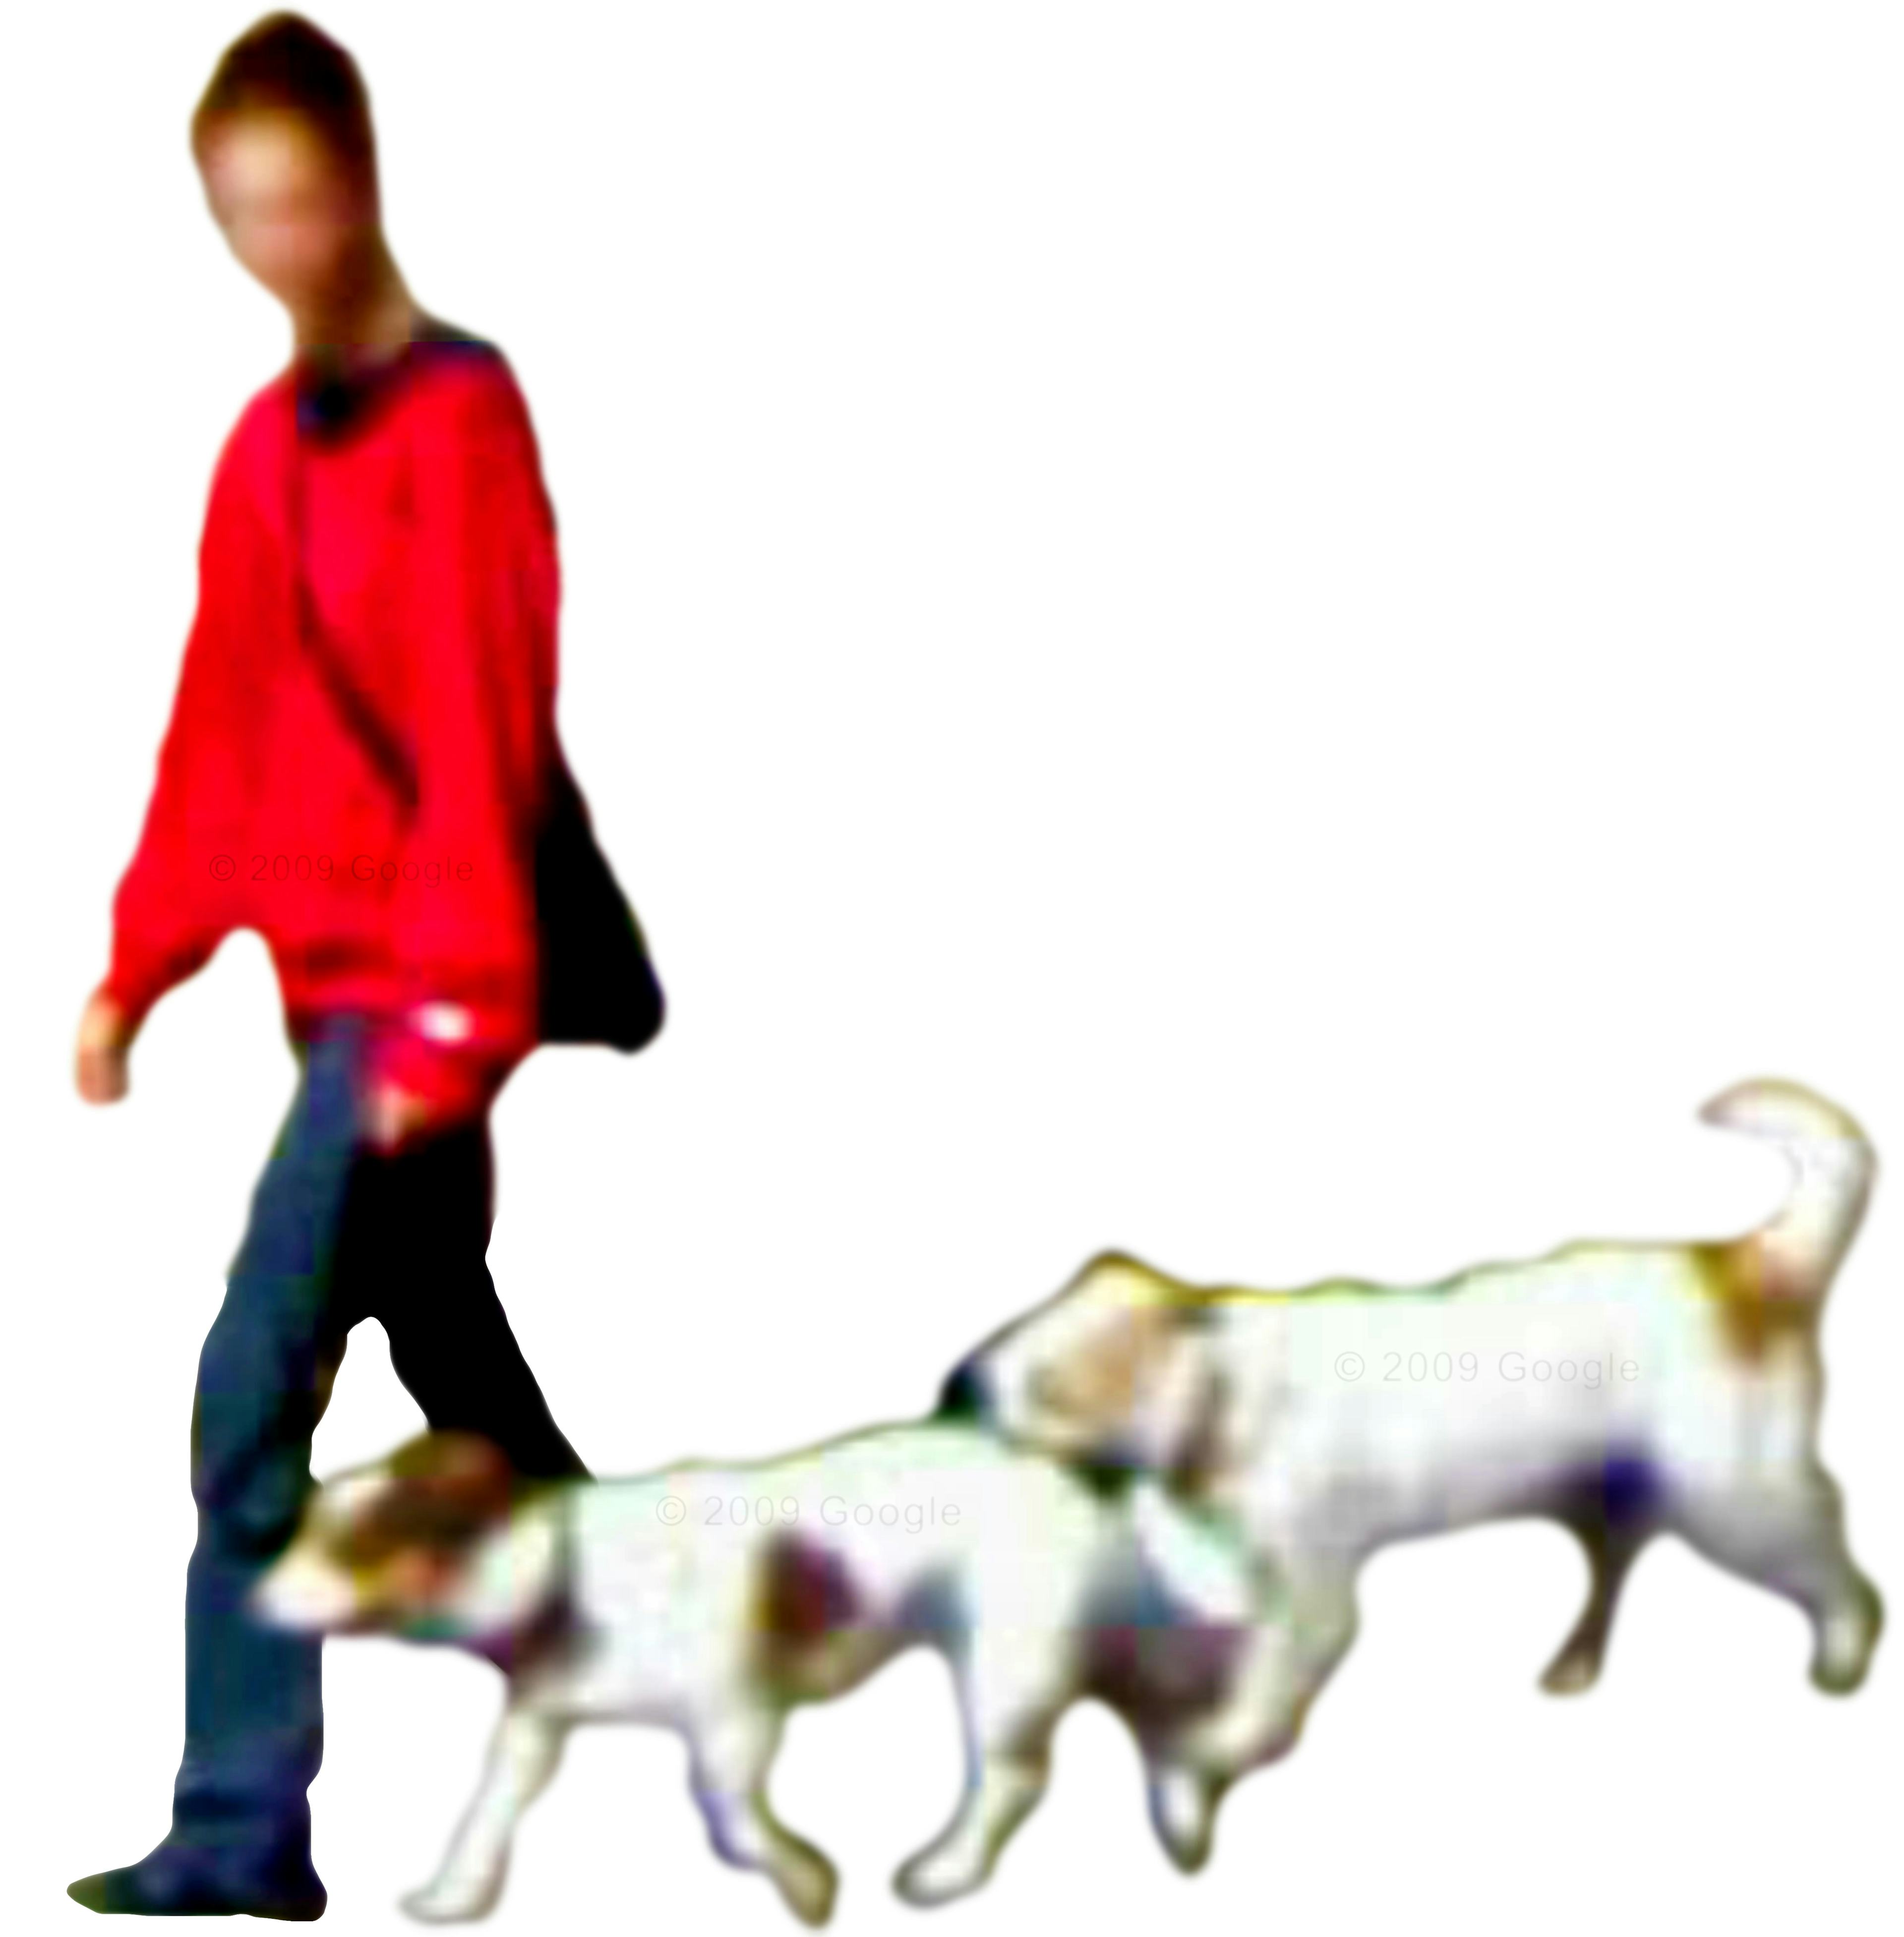 Screenshot of Google Maps of a person walking dogs